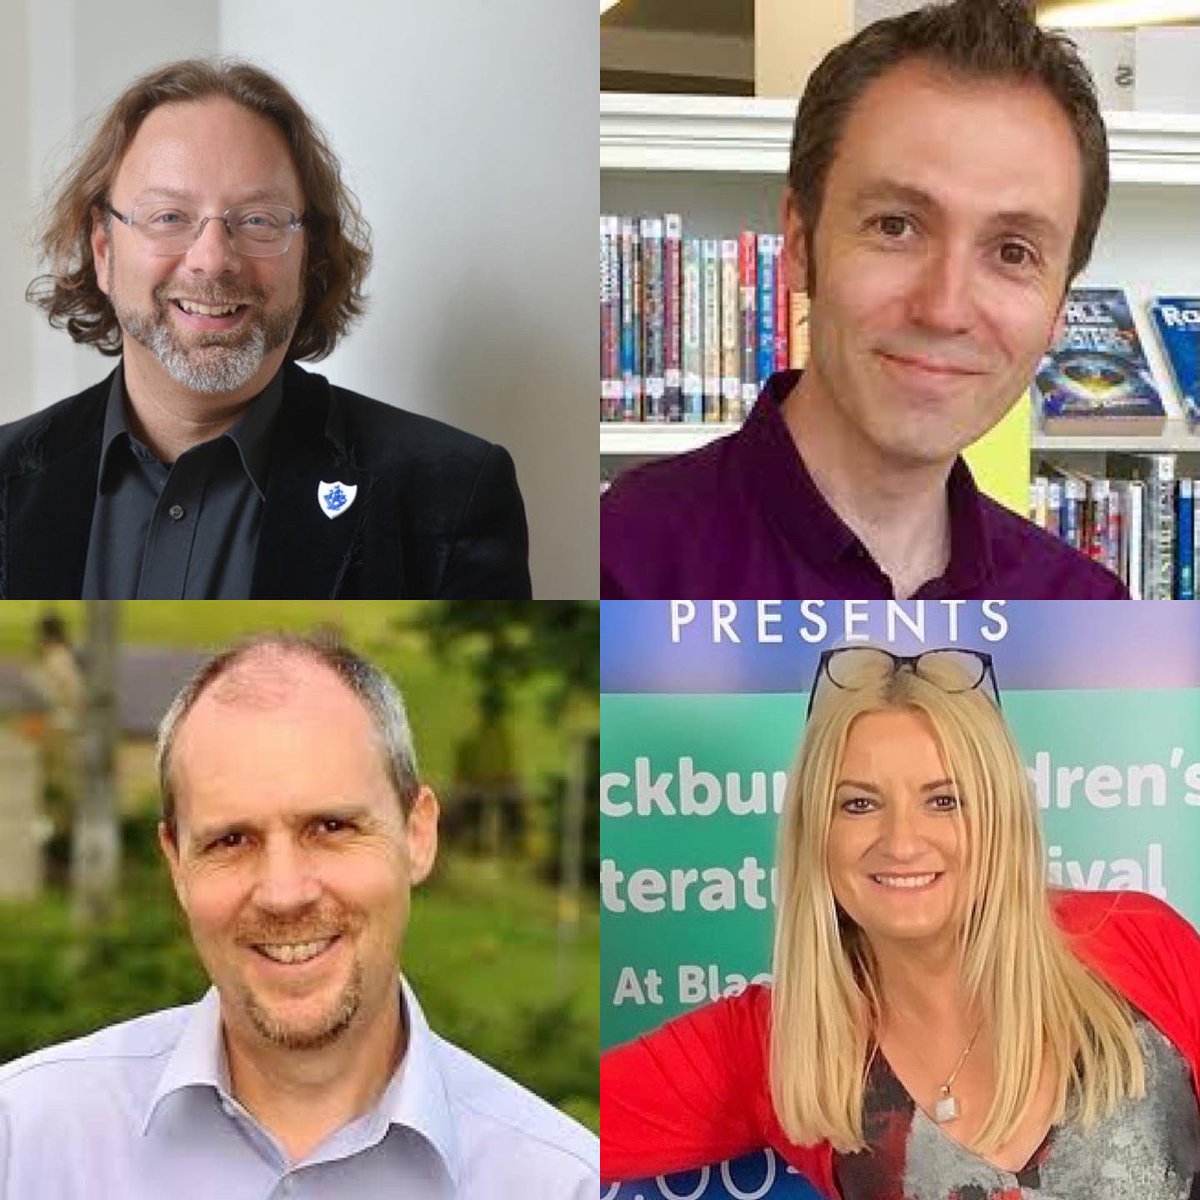 This week we are heading over to @BwDLibraries @LancsLibraries @BpoolLibraries @Liverpoollib #librariestransform Huge thanks to all publishers, sponsor @ReadSolutionsUK & ambassadors @andyseedauthor @whatSFSaid @callaghansstuff @ChristiGabbitas #childrensbookawards